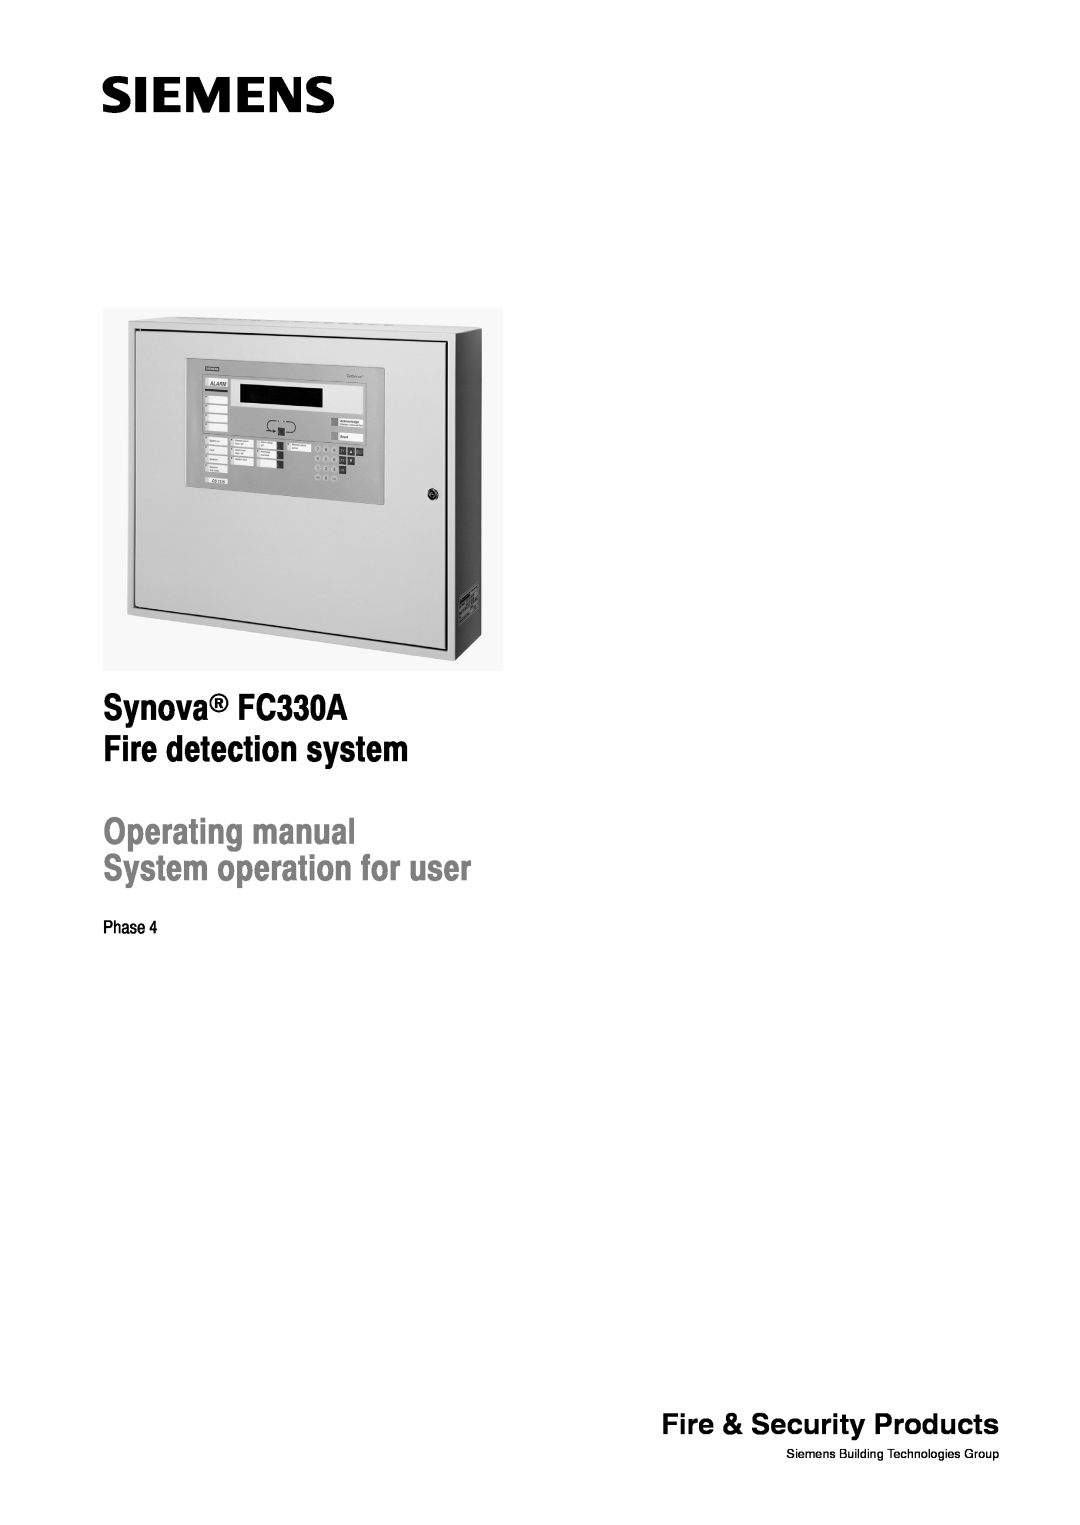 Siemens manual Fire & Security Products, Synova FC330A Fire detection system, Phase 